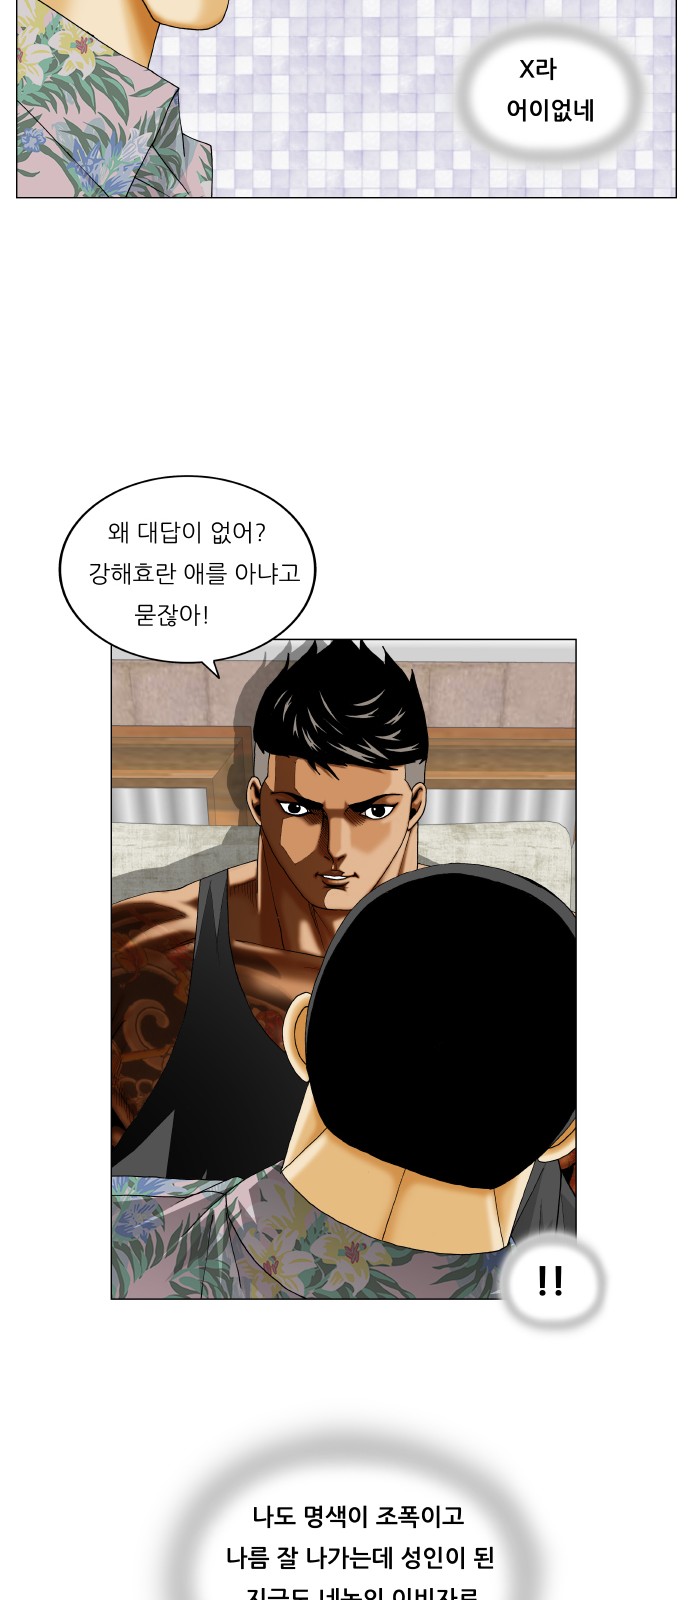 Ultimate Legend - Kang Hae Hyo - Chapter 271 - Page 4